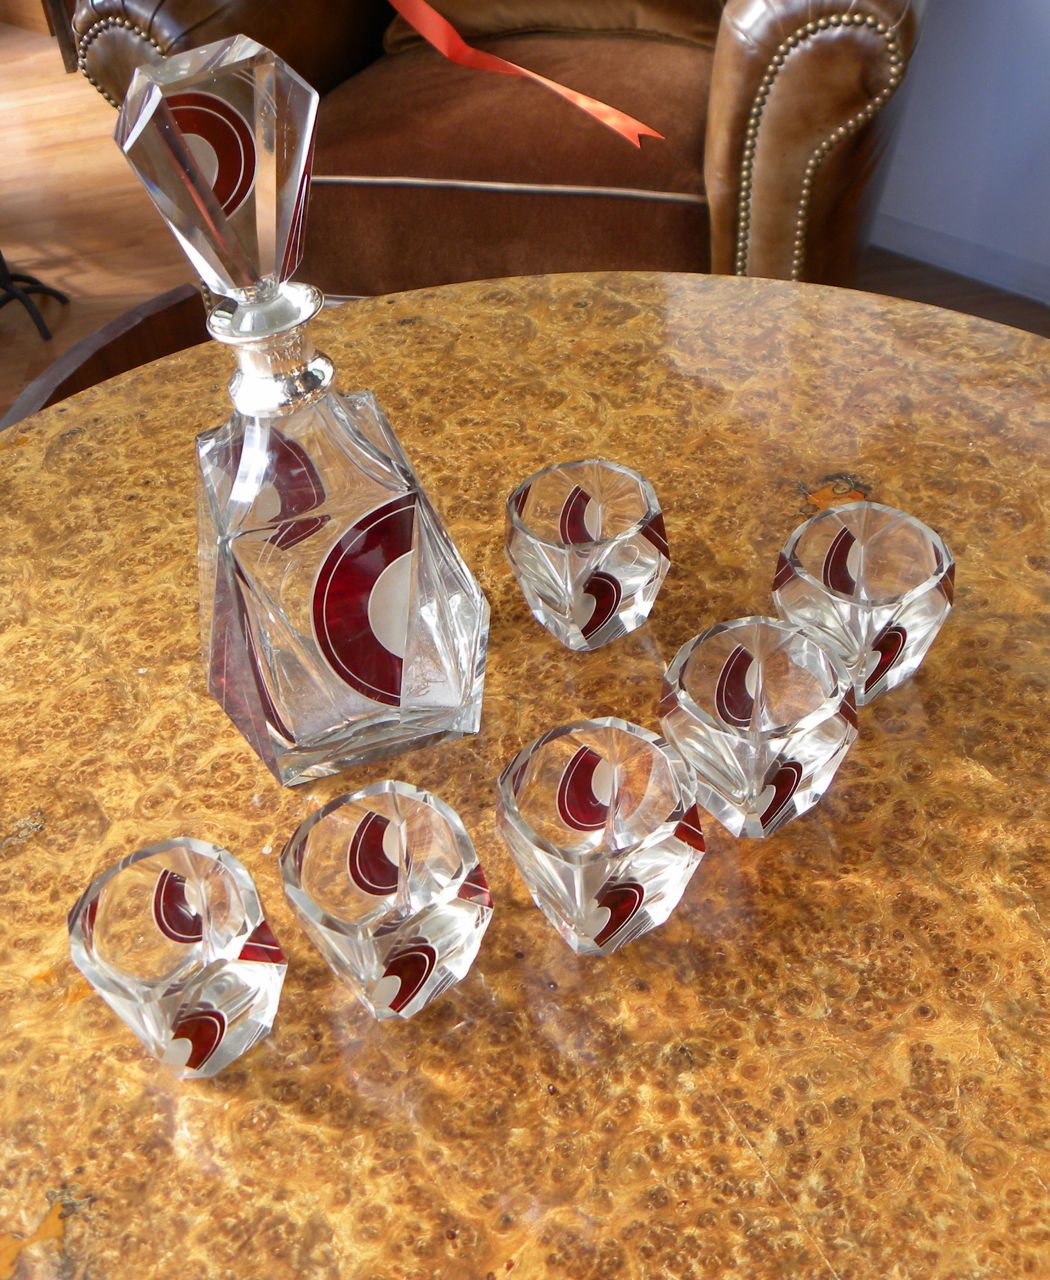 Very Rare Original Art Deco Czech Whisky Decanter Set 1930s in Ruby Red